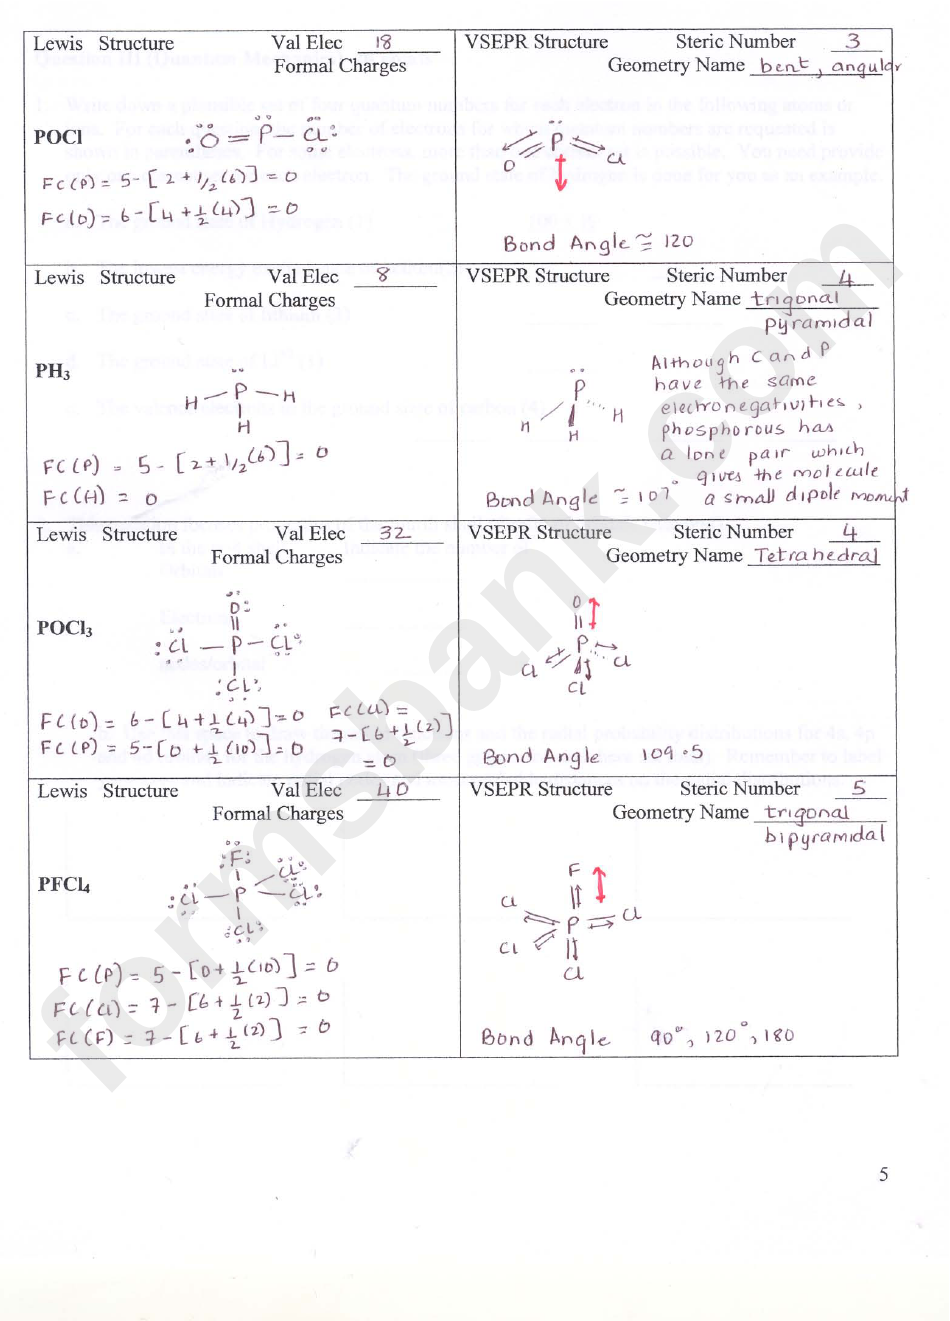 Chemistry Exam Worksheets With Answers - Chemistry 11, Exam Ii - 2006